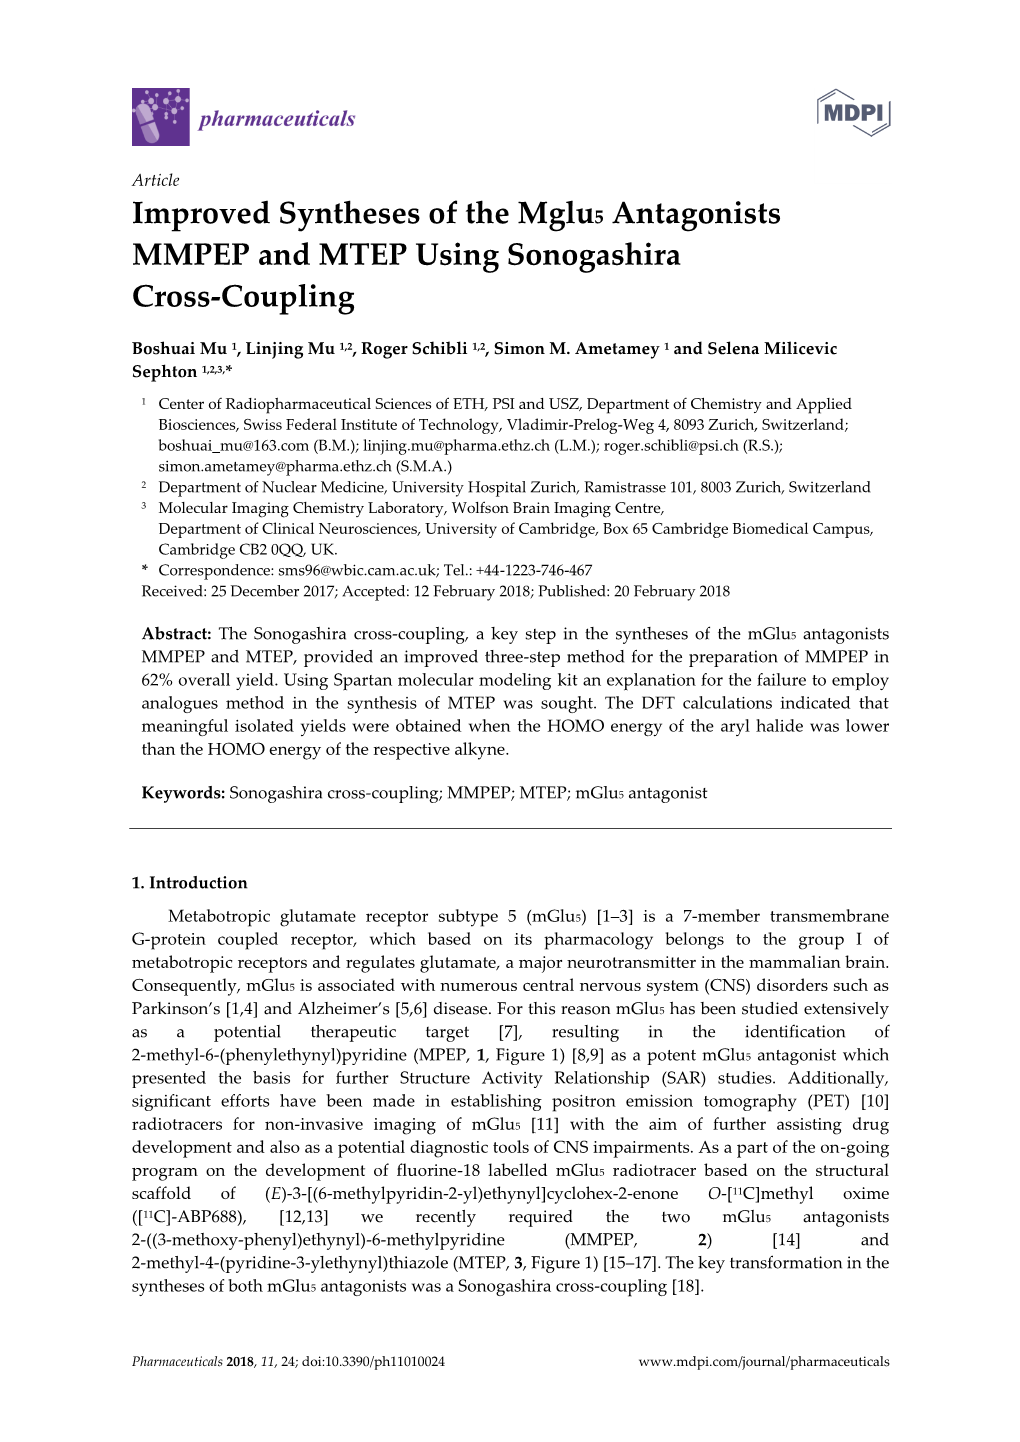 Improved Syntheses of the Mglu5 Antagonists MMPEP and MTEP Using Sonogashira Cross-Coupling